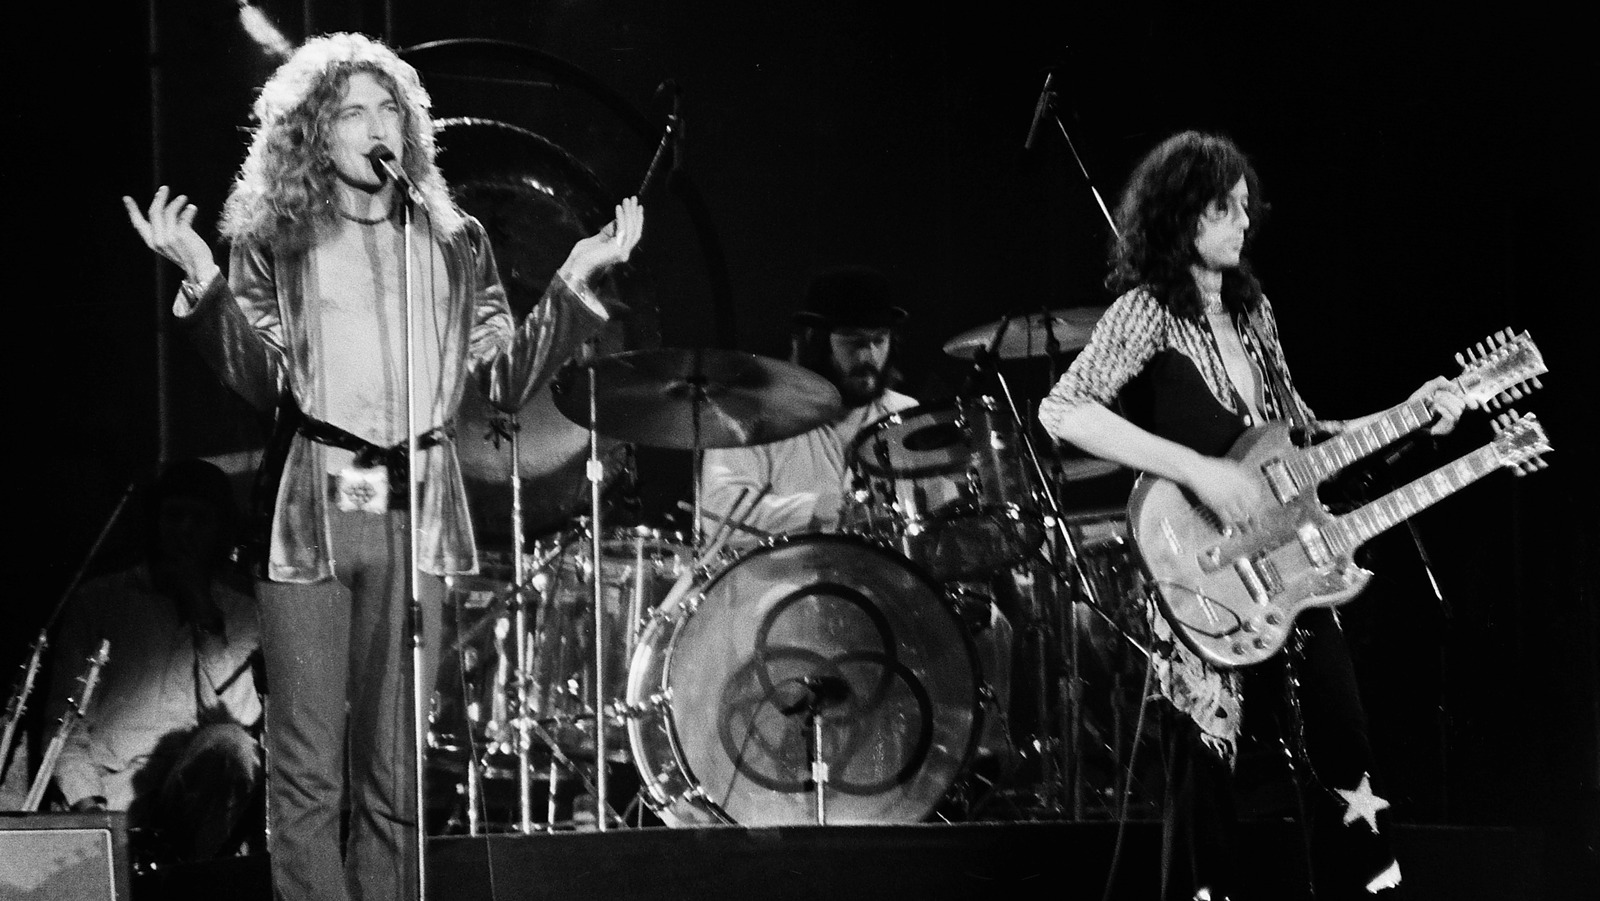 The Song Robert Plant Wrote That Expressed The Broken Relationship With